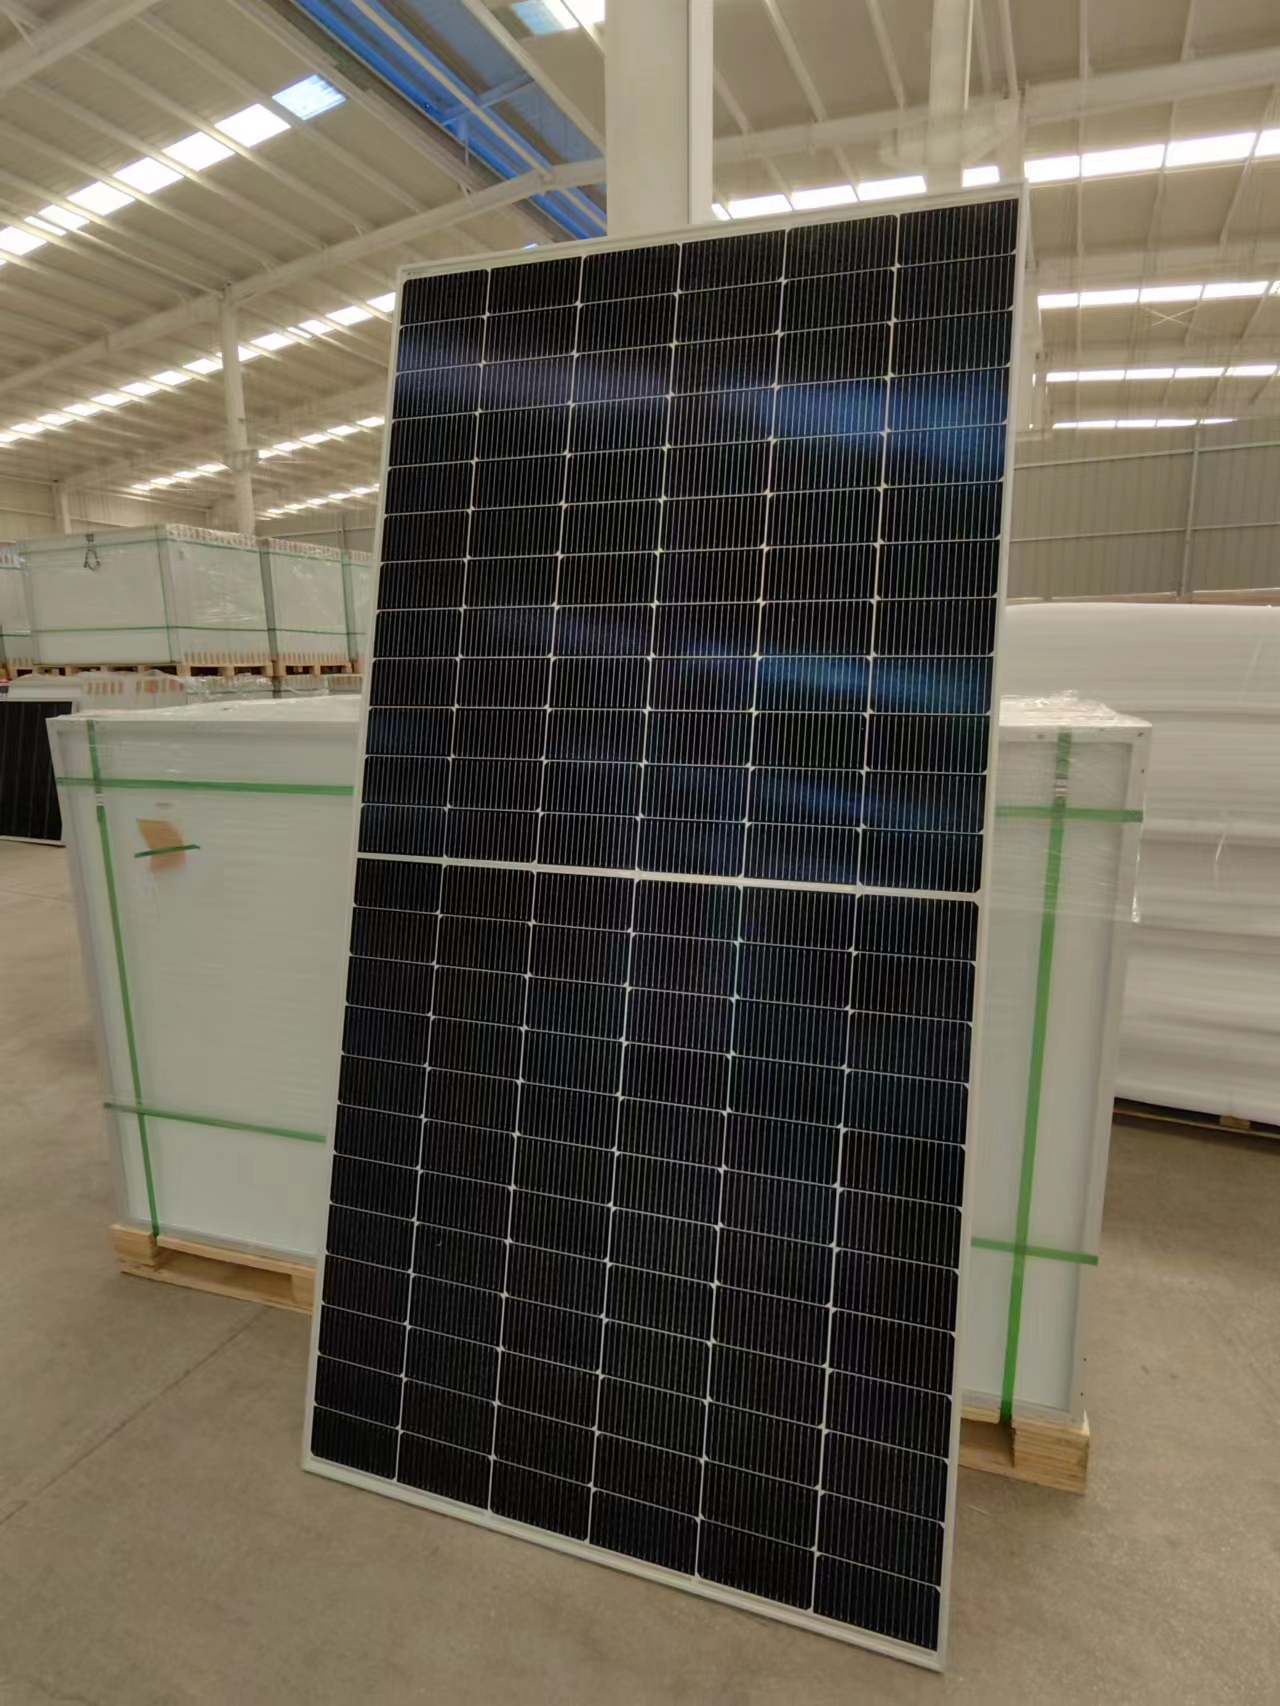 Efficient N-type single crystal 580W solar photovoltaic panel for rooftop power generation, industrial and commercial photovoltaic panel components